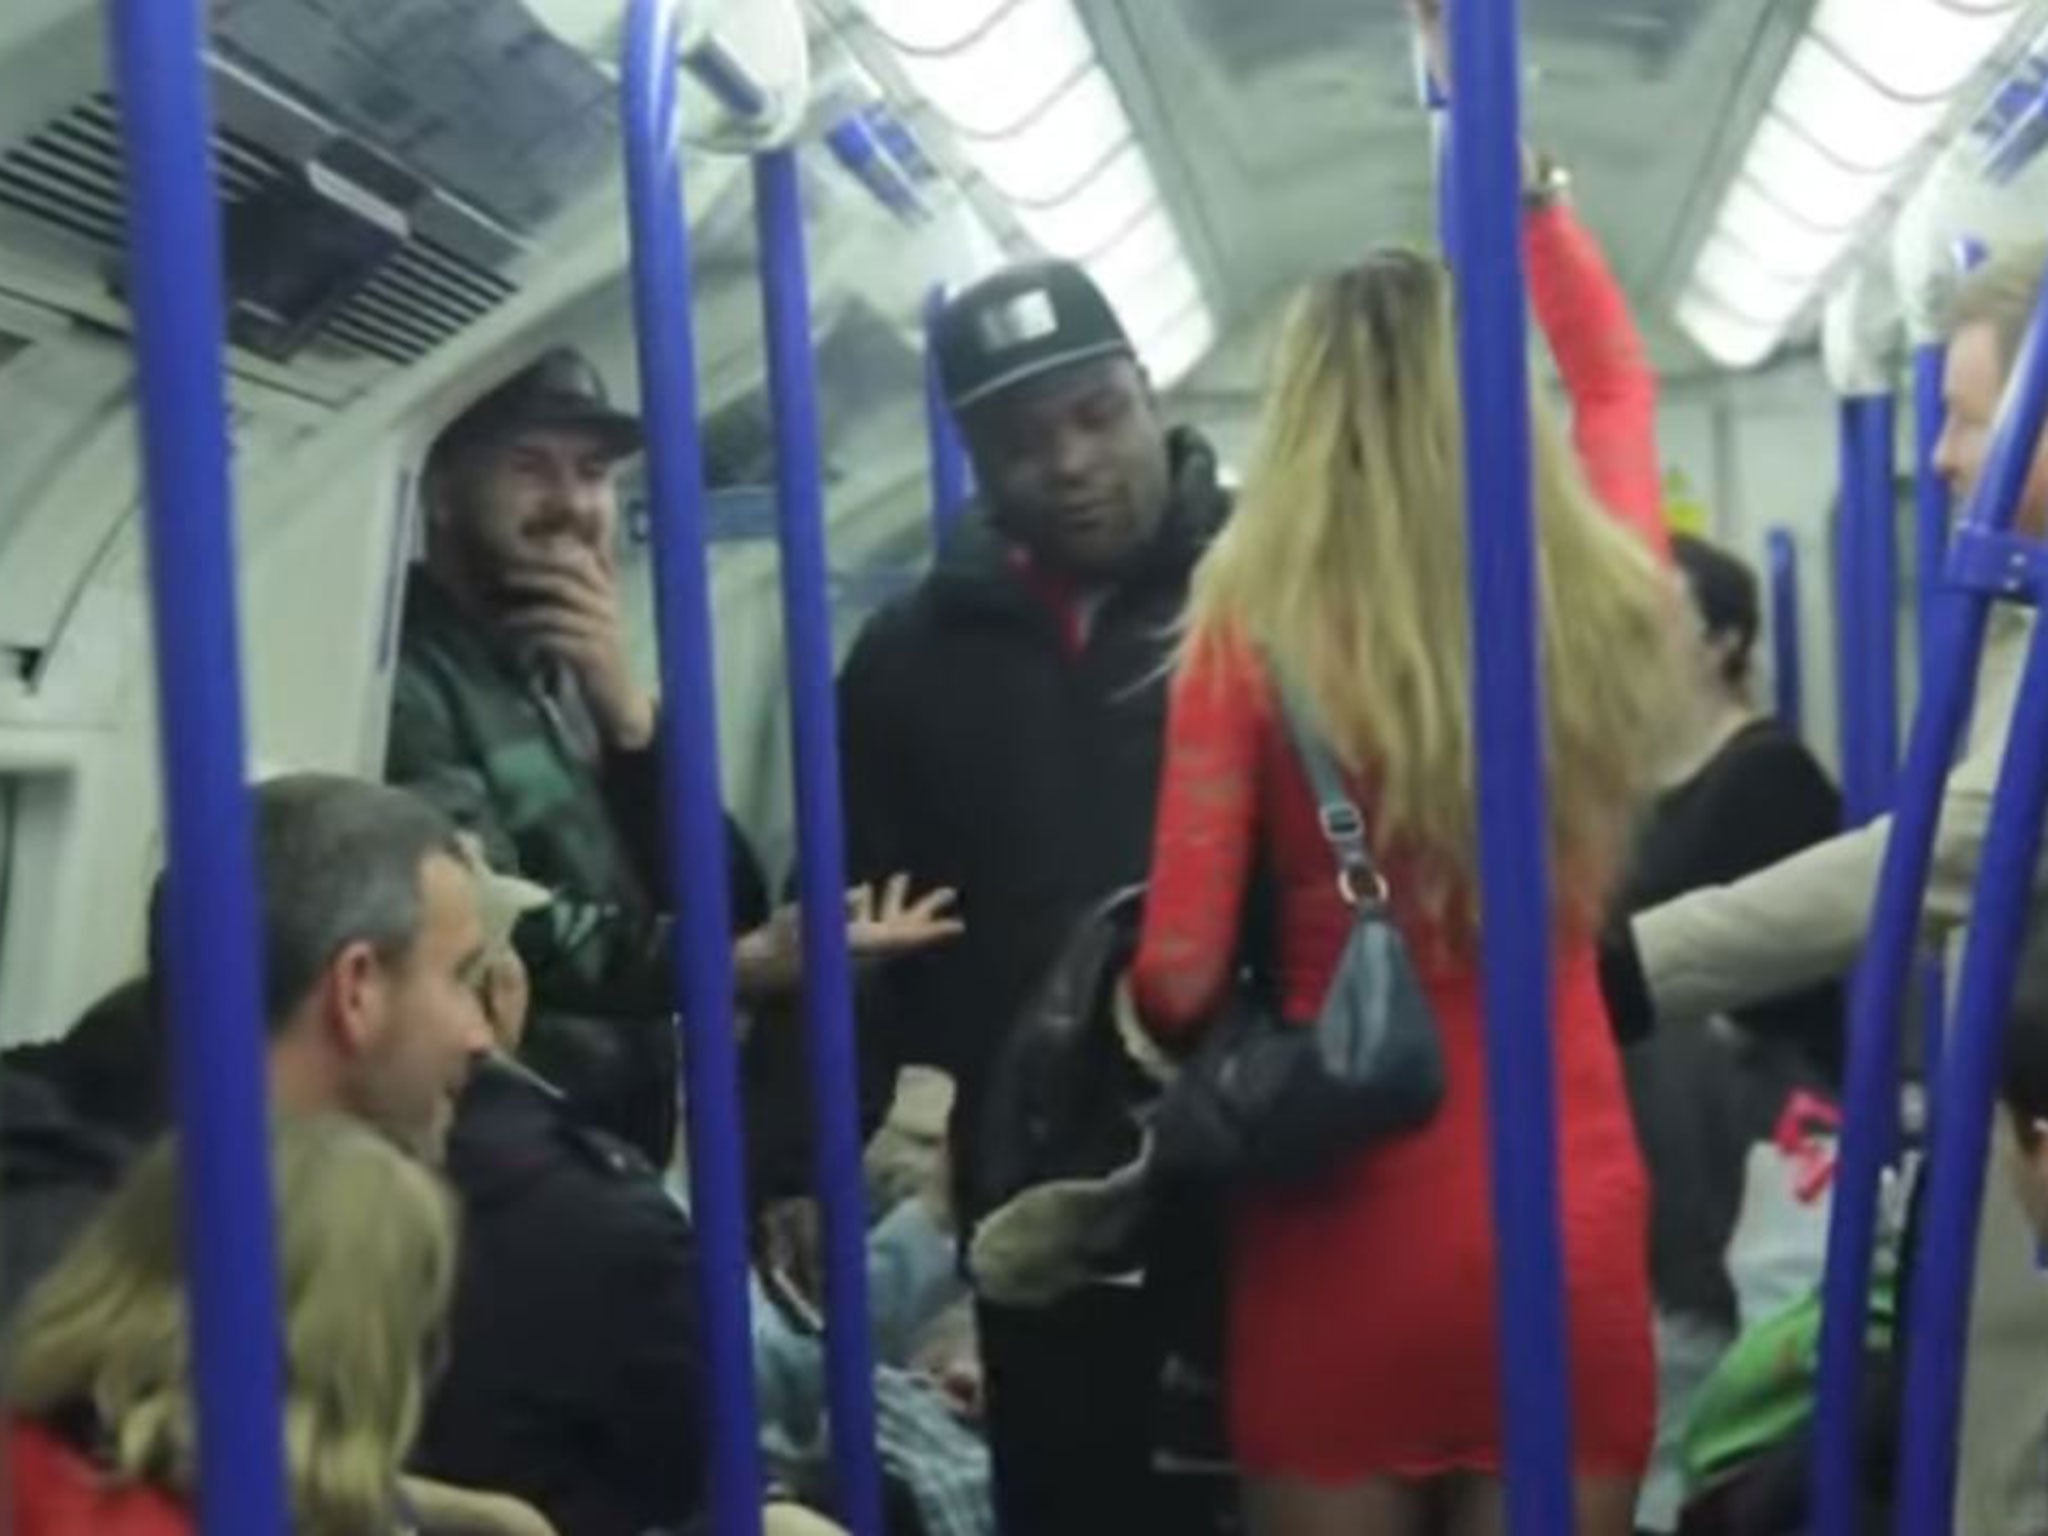 Pranks for nothing: an actor verbally abuses a woman on a Tube train, as part of a Trollstation stunt